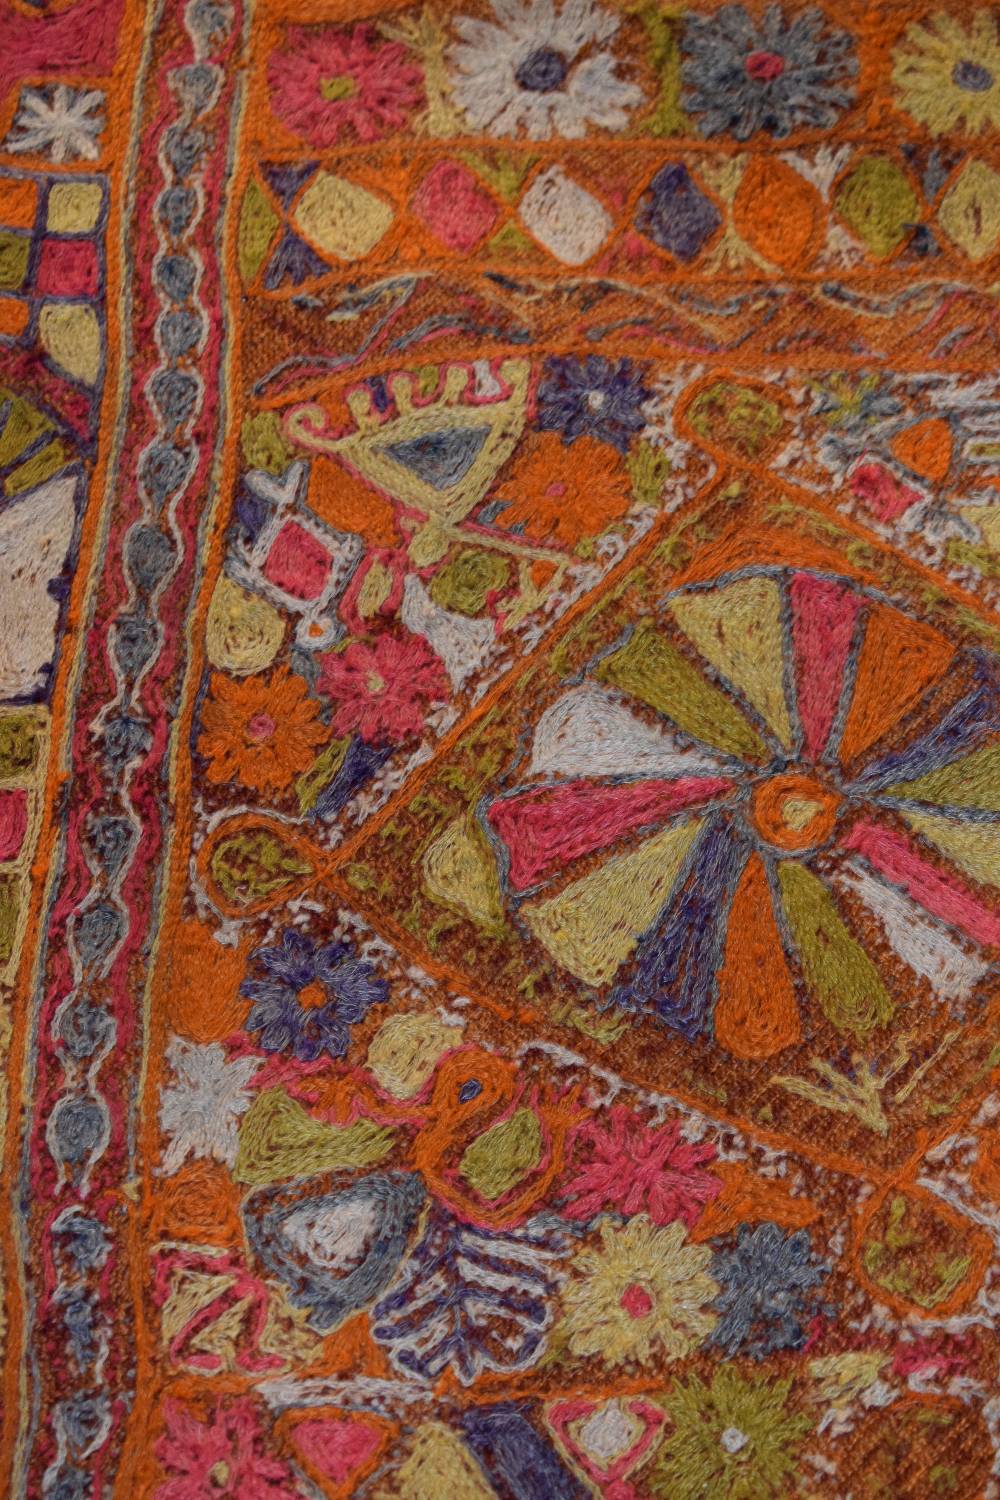 Iraqi embroidered wedding blanket, Samawa, Marshlands of southern Iraq, 20th century, 5ft. 4in. 1. - Image 9 of 13